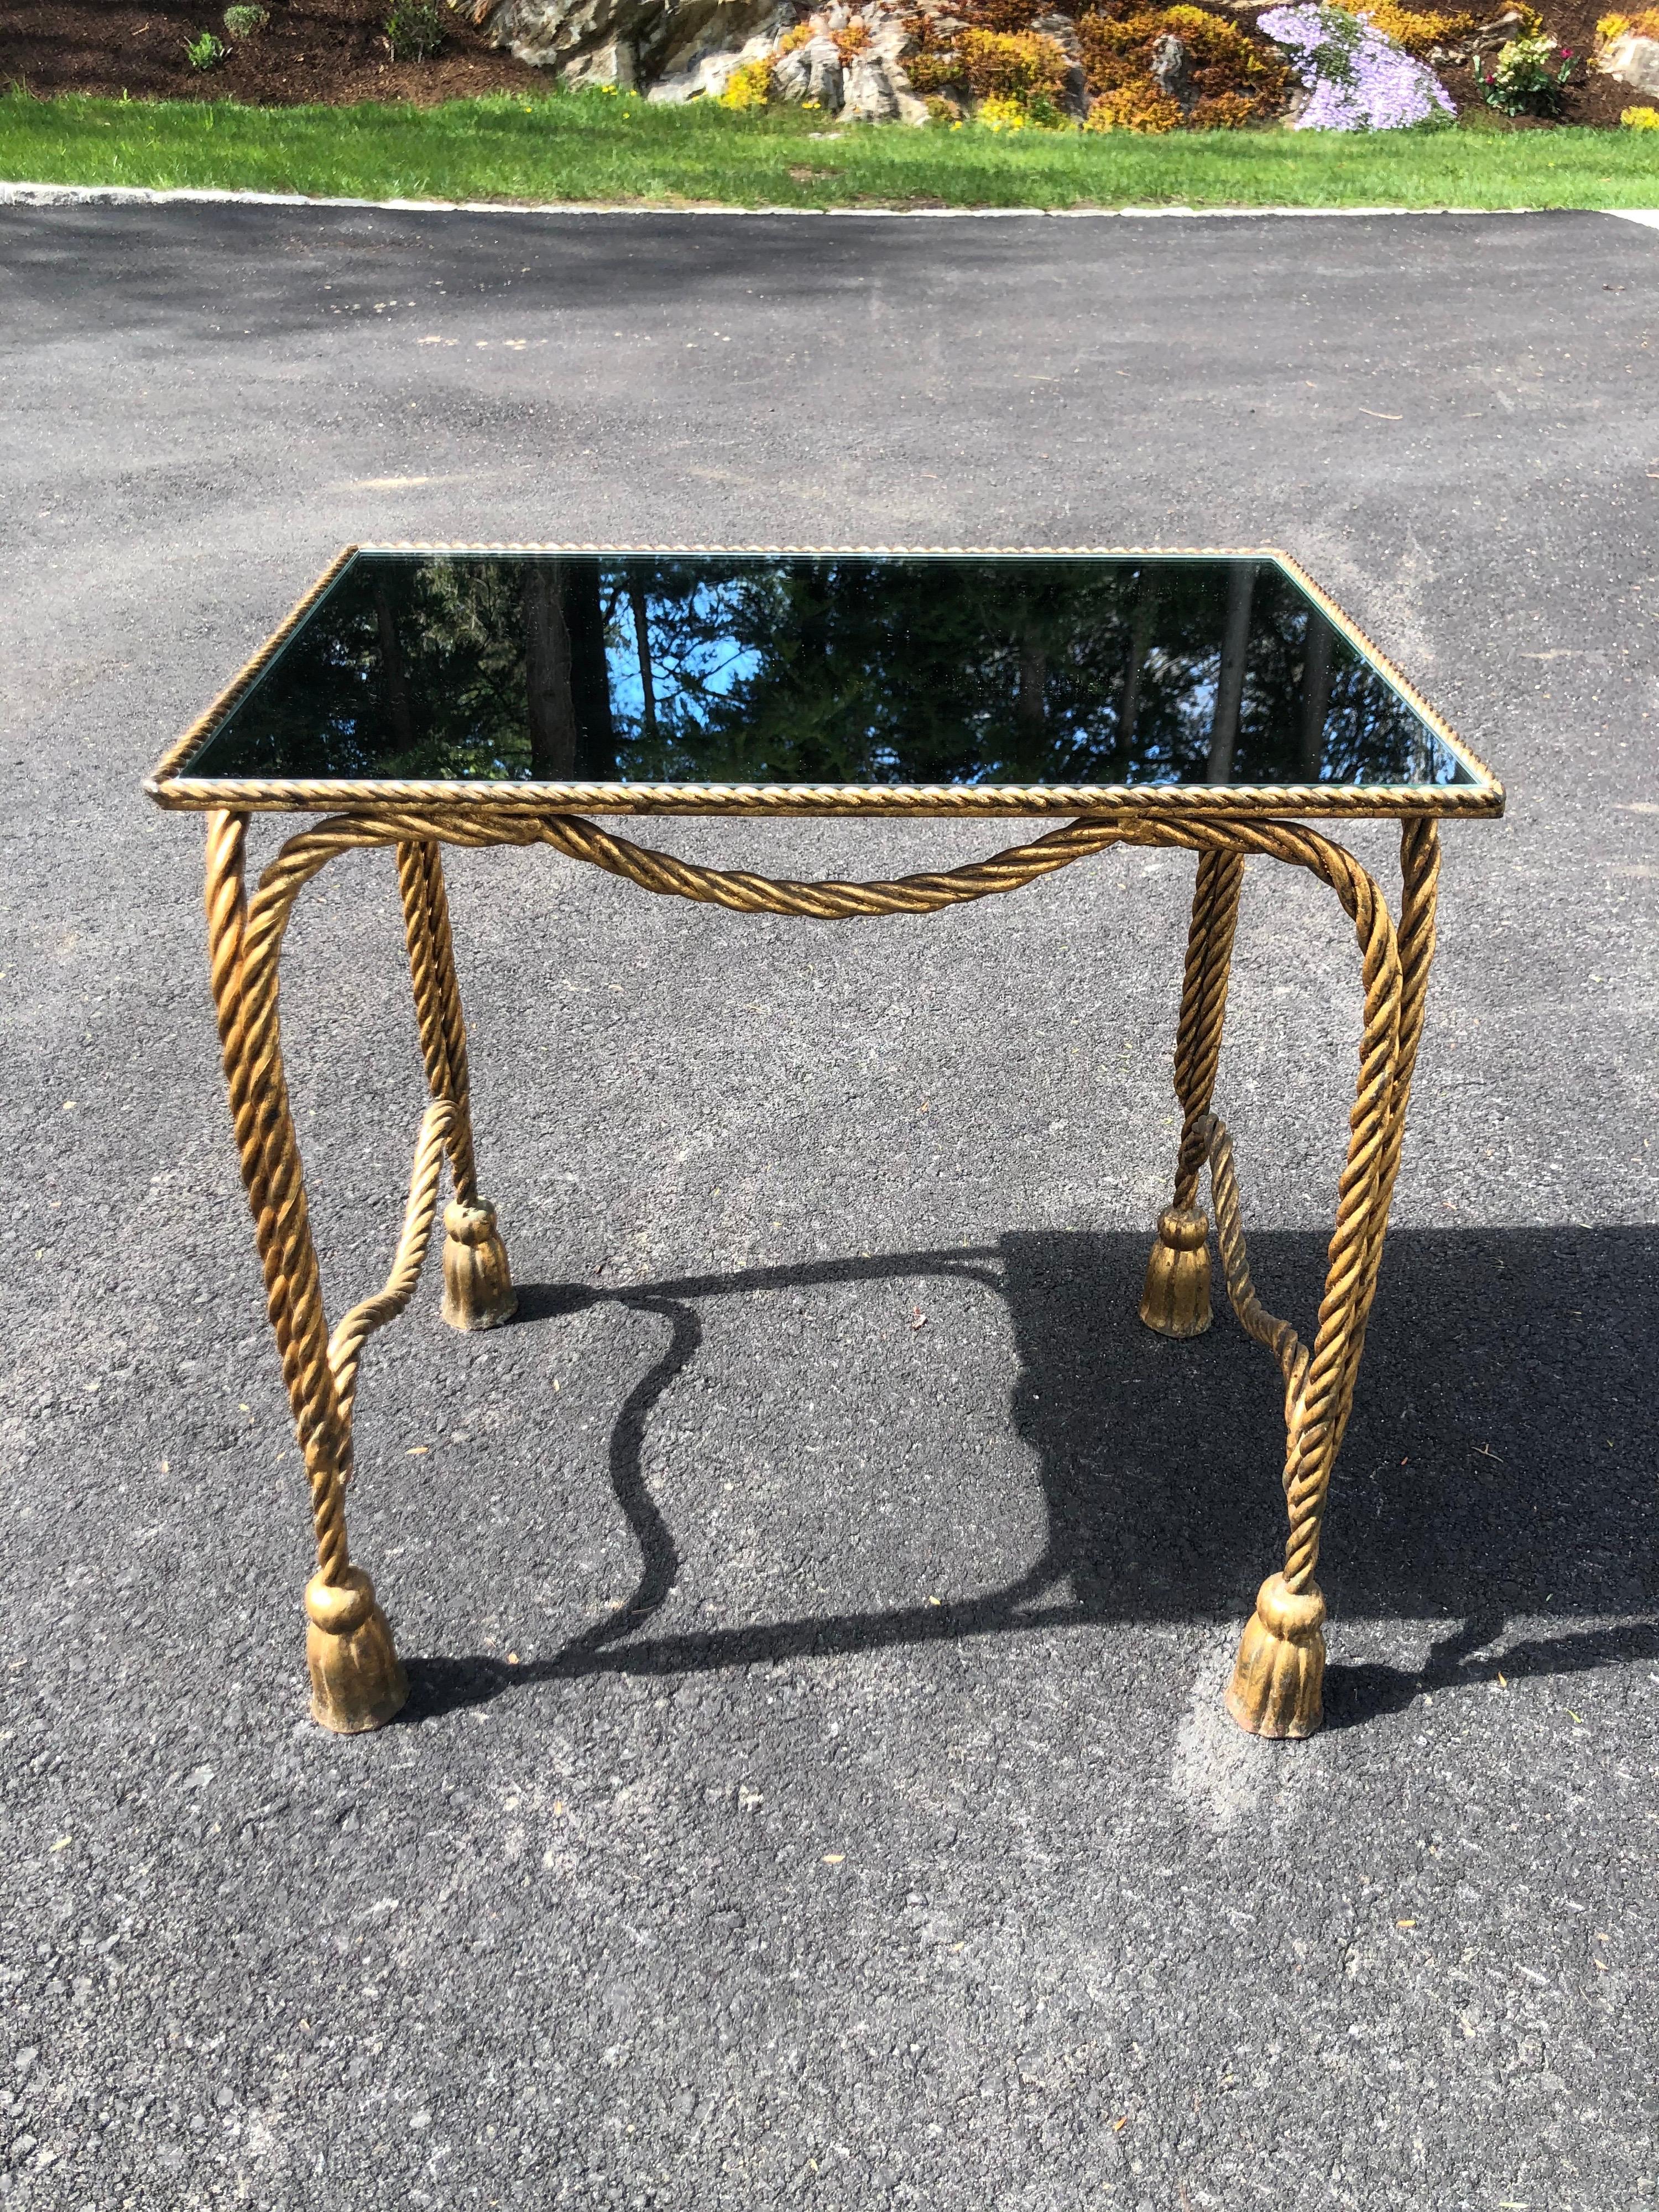 Hollywood Regency Italian Gilt Rope Design Table with Mirror Top